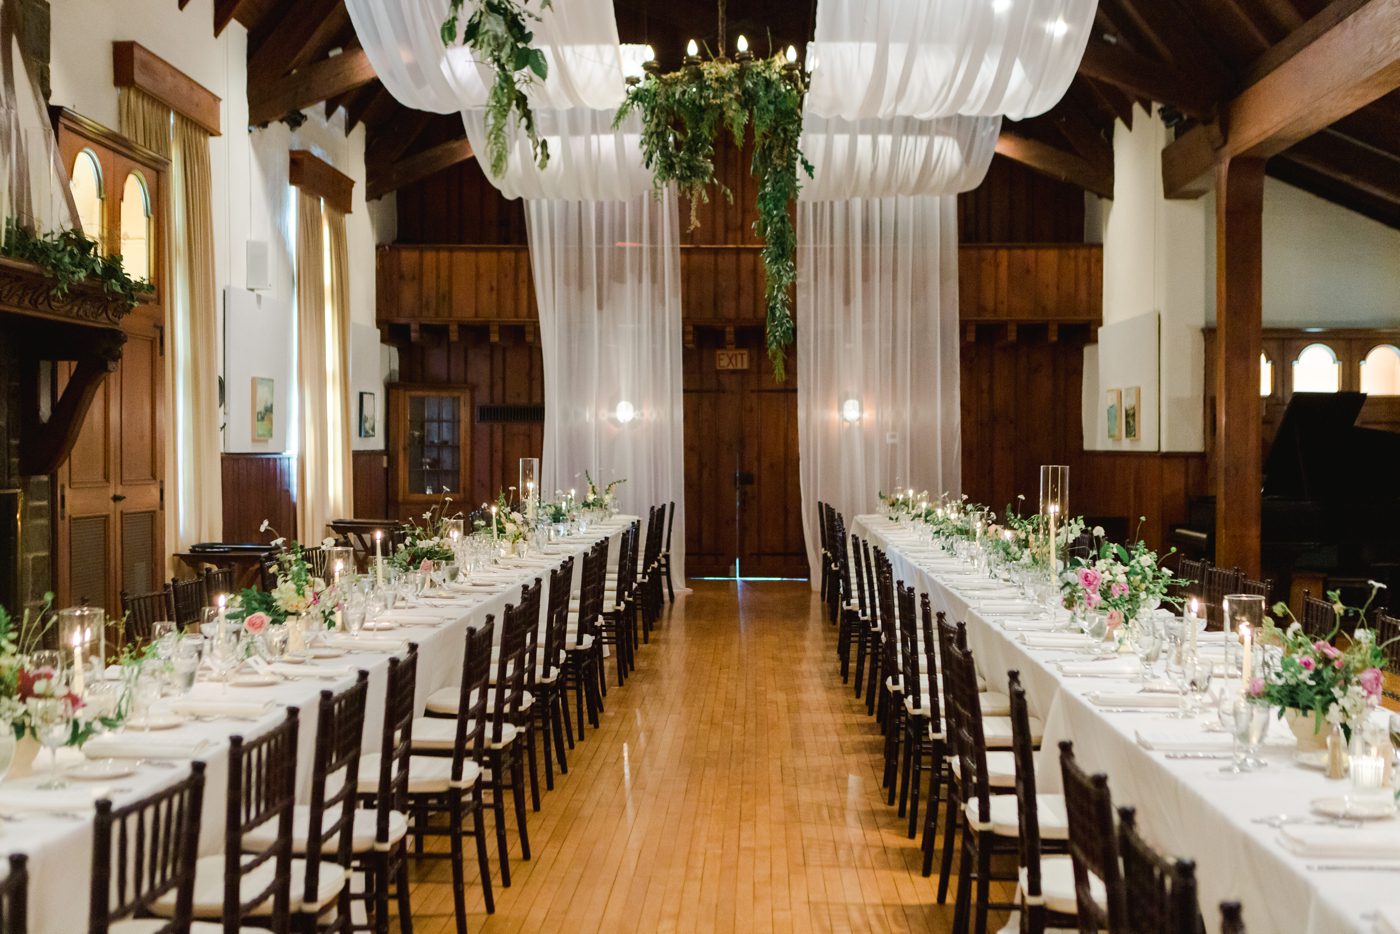 Wedding reception at The Garret Club with white linens and hand picked flowers